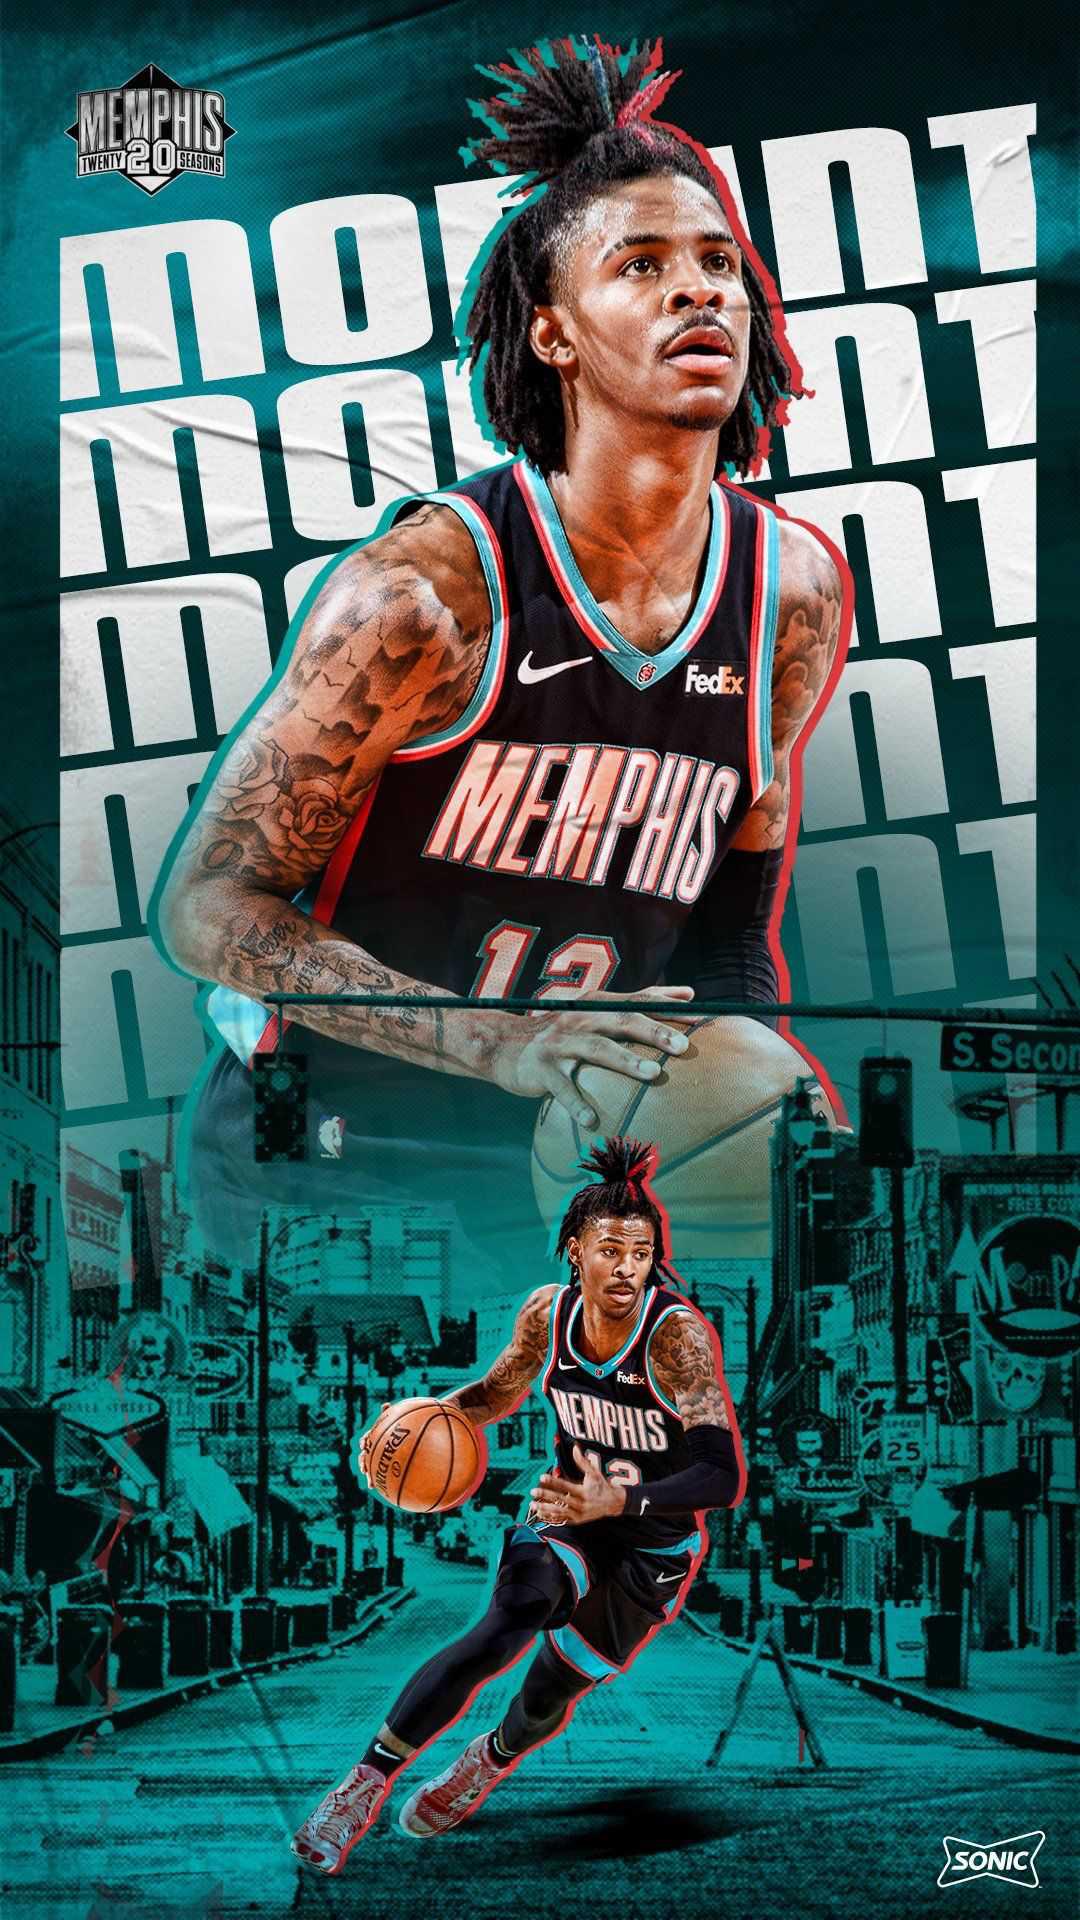 Ja Morant Wallpaper Discover more American Professional Basketball Player  College Ja Morant National   Basketball wallpaper Nba pictures  Basketball pictures